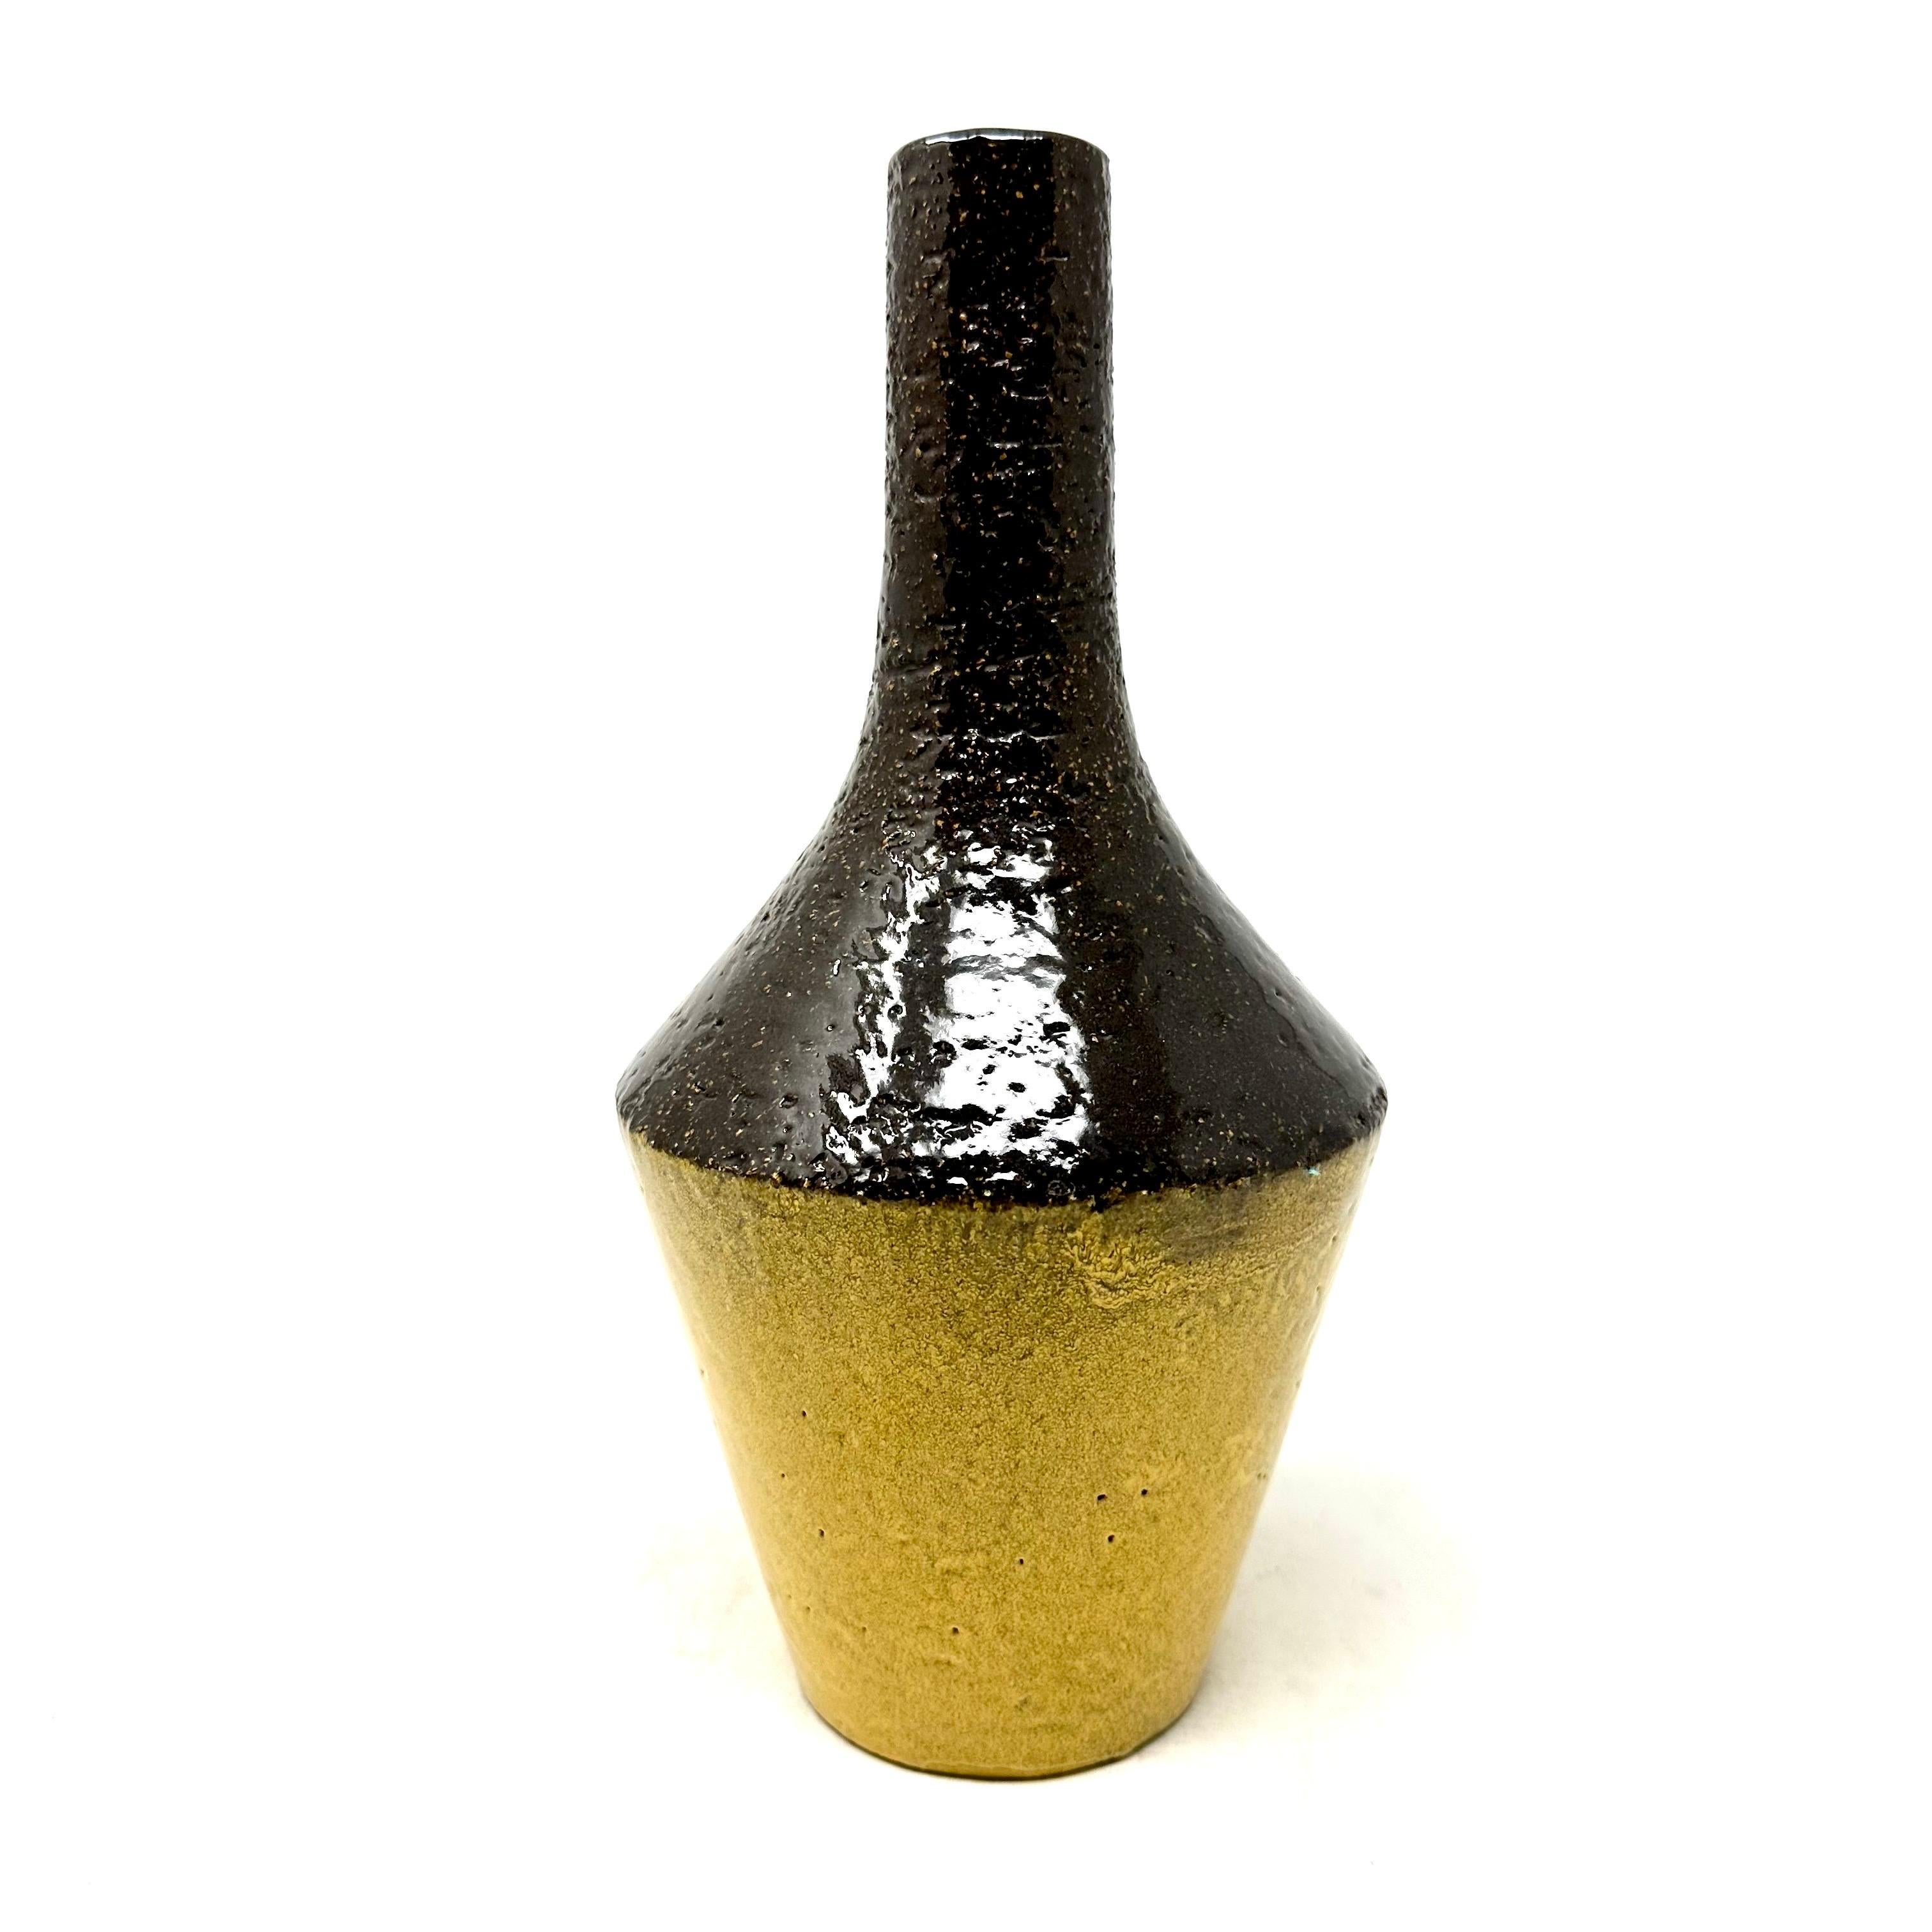 1957 yellow and brown pottery vase by Ingrid Atterberg for Upsala Ekeby, Sweden. In excellent condition, with original sticker. Marked on the underside.

Diameter: 5 in / Height: 10.5 in

—

Ingrid Atterberg (1920-2008) was a Swedish ceramic